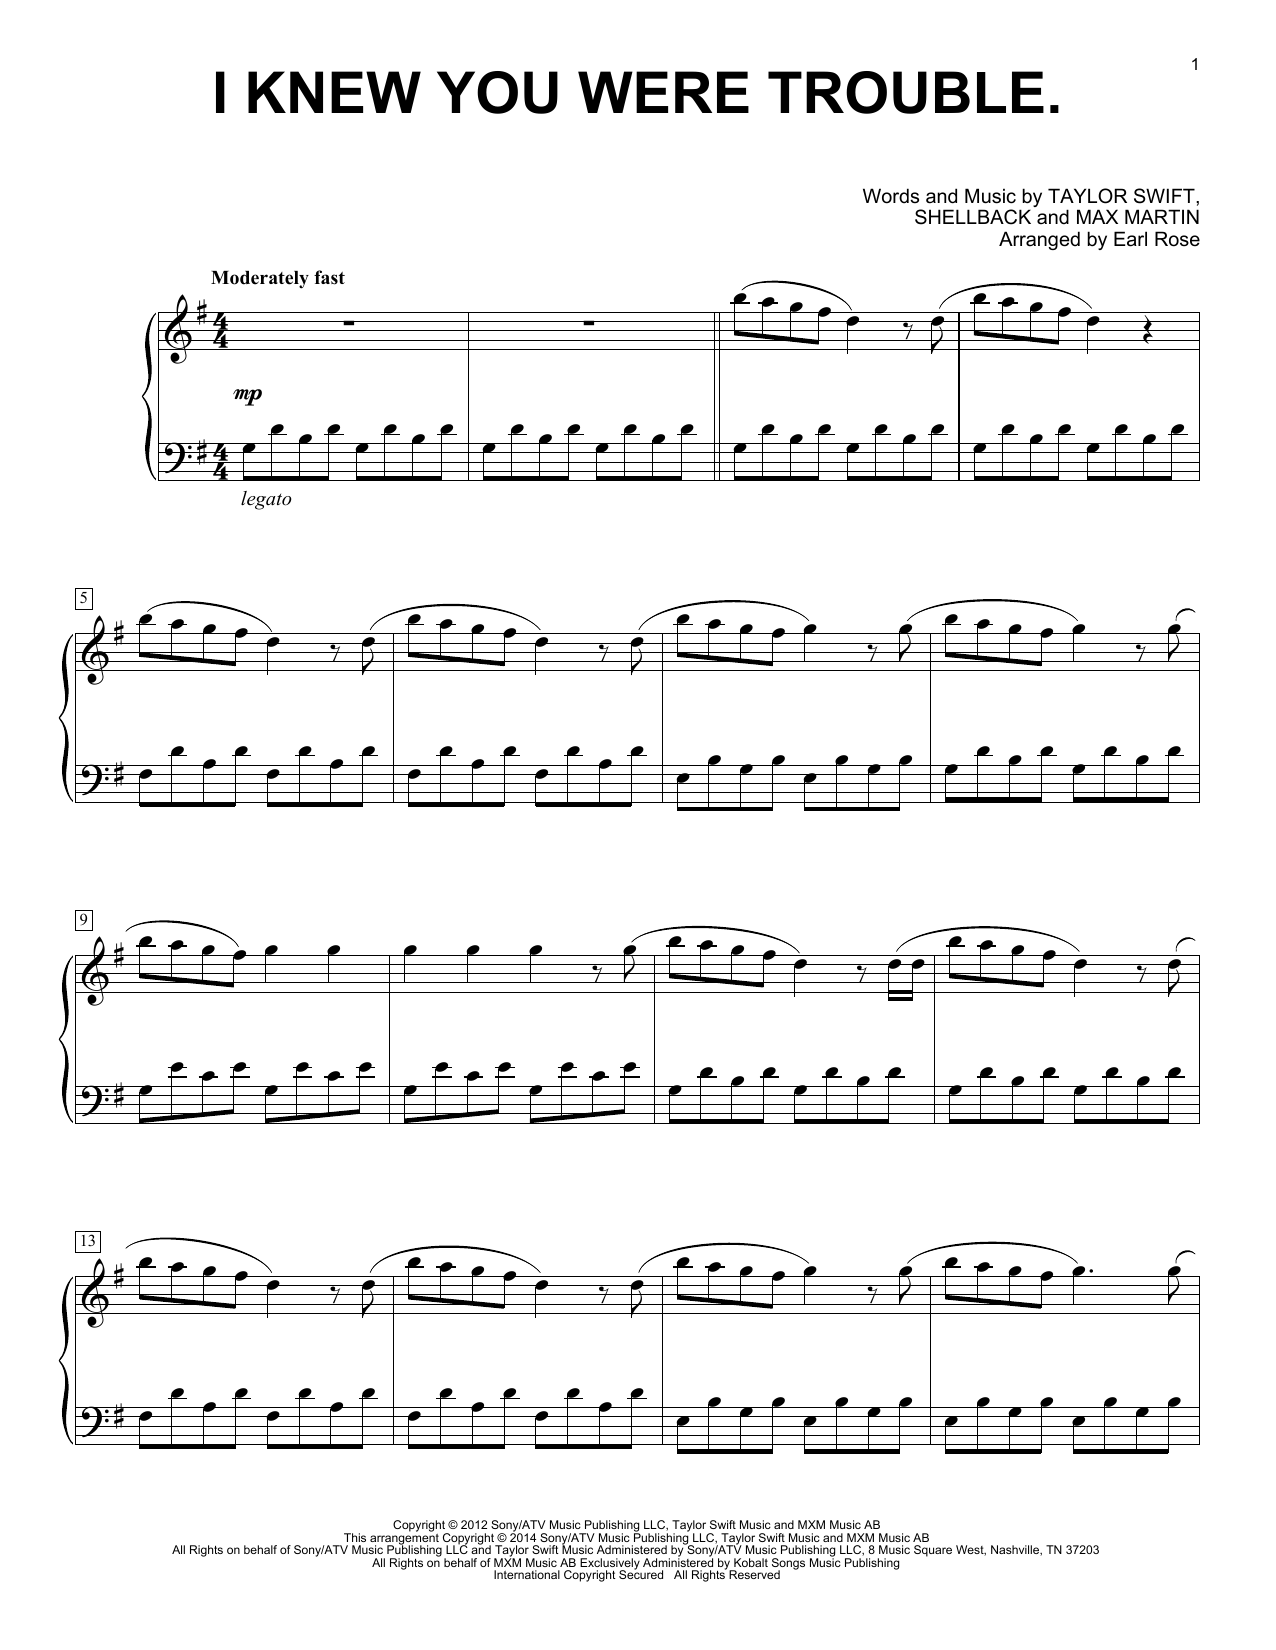 Download Earl Rose I Knew You Were Trouble. Sheet Music